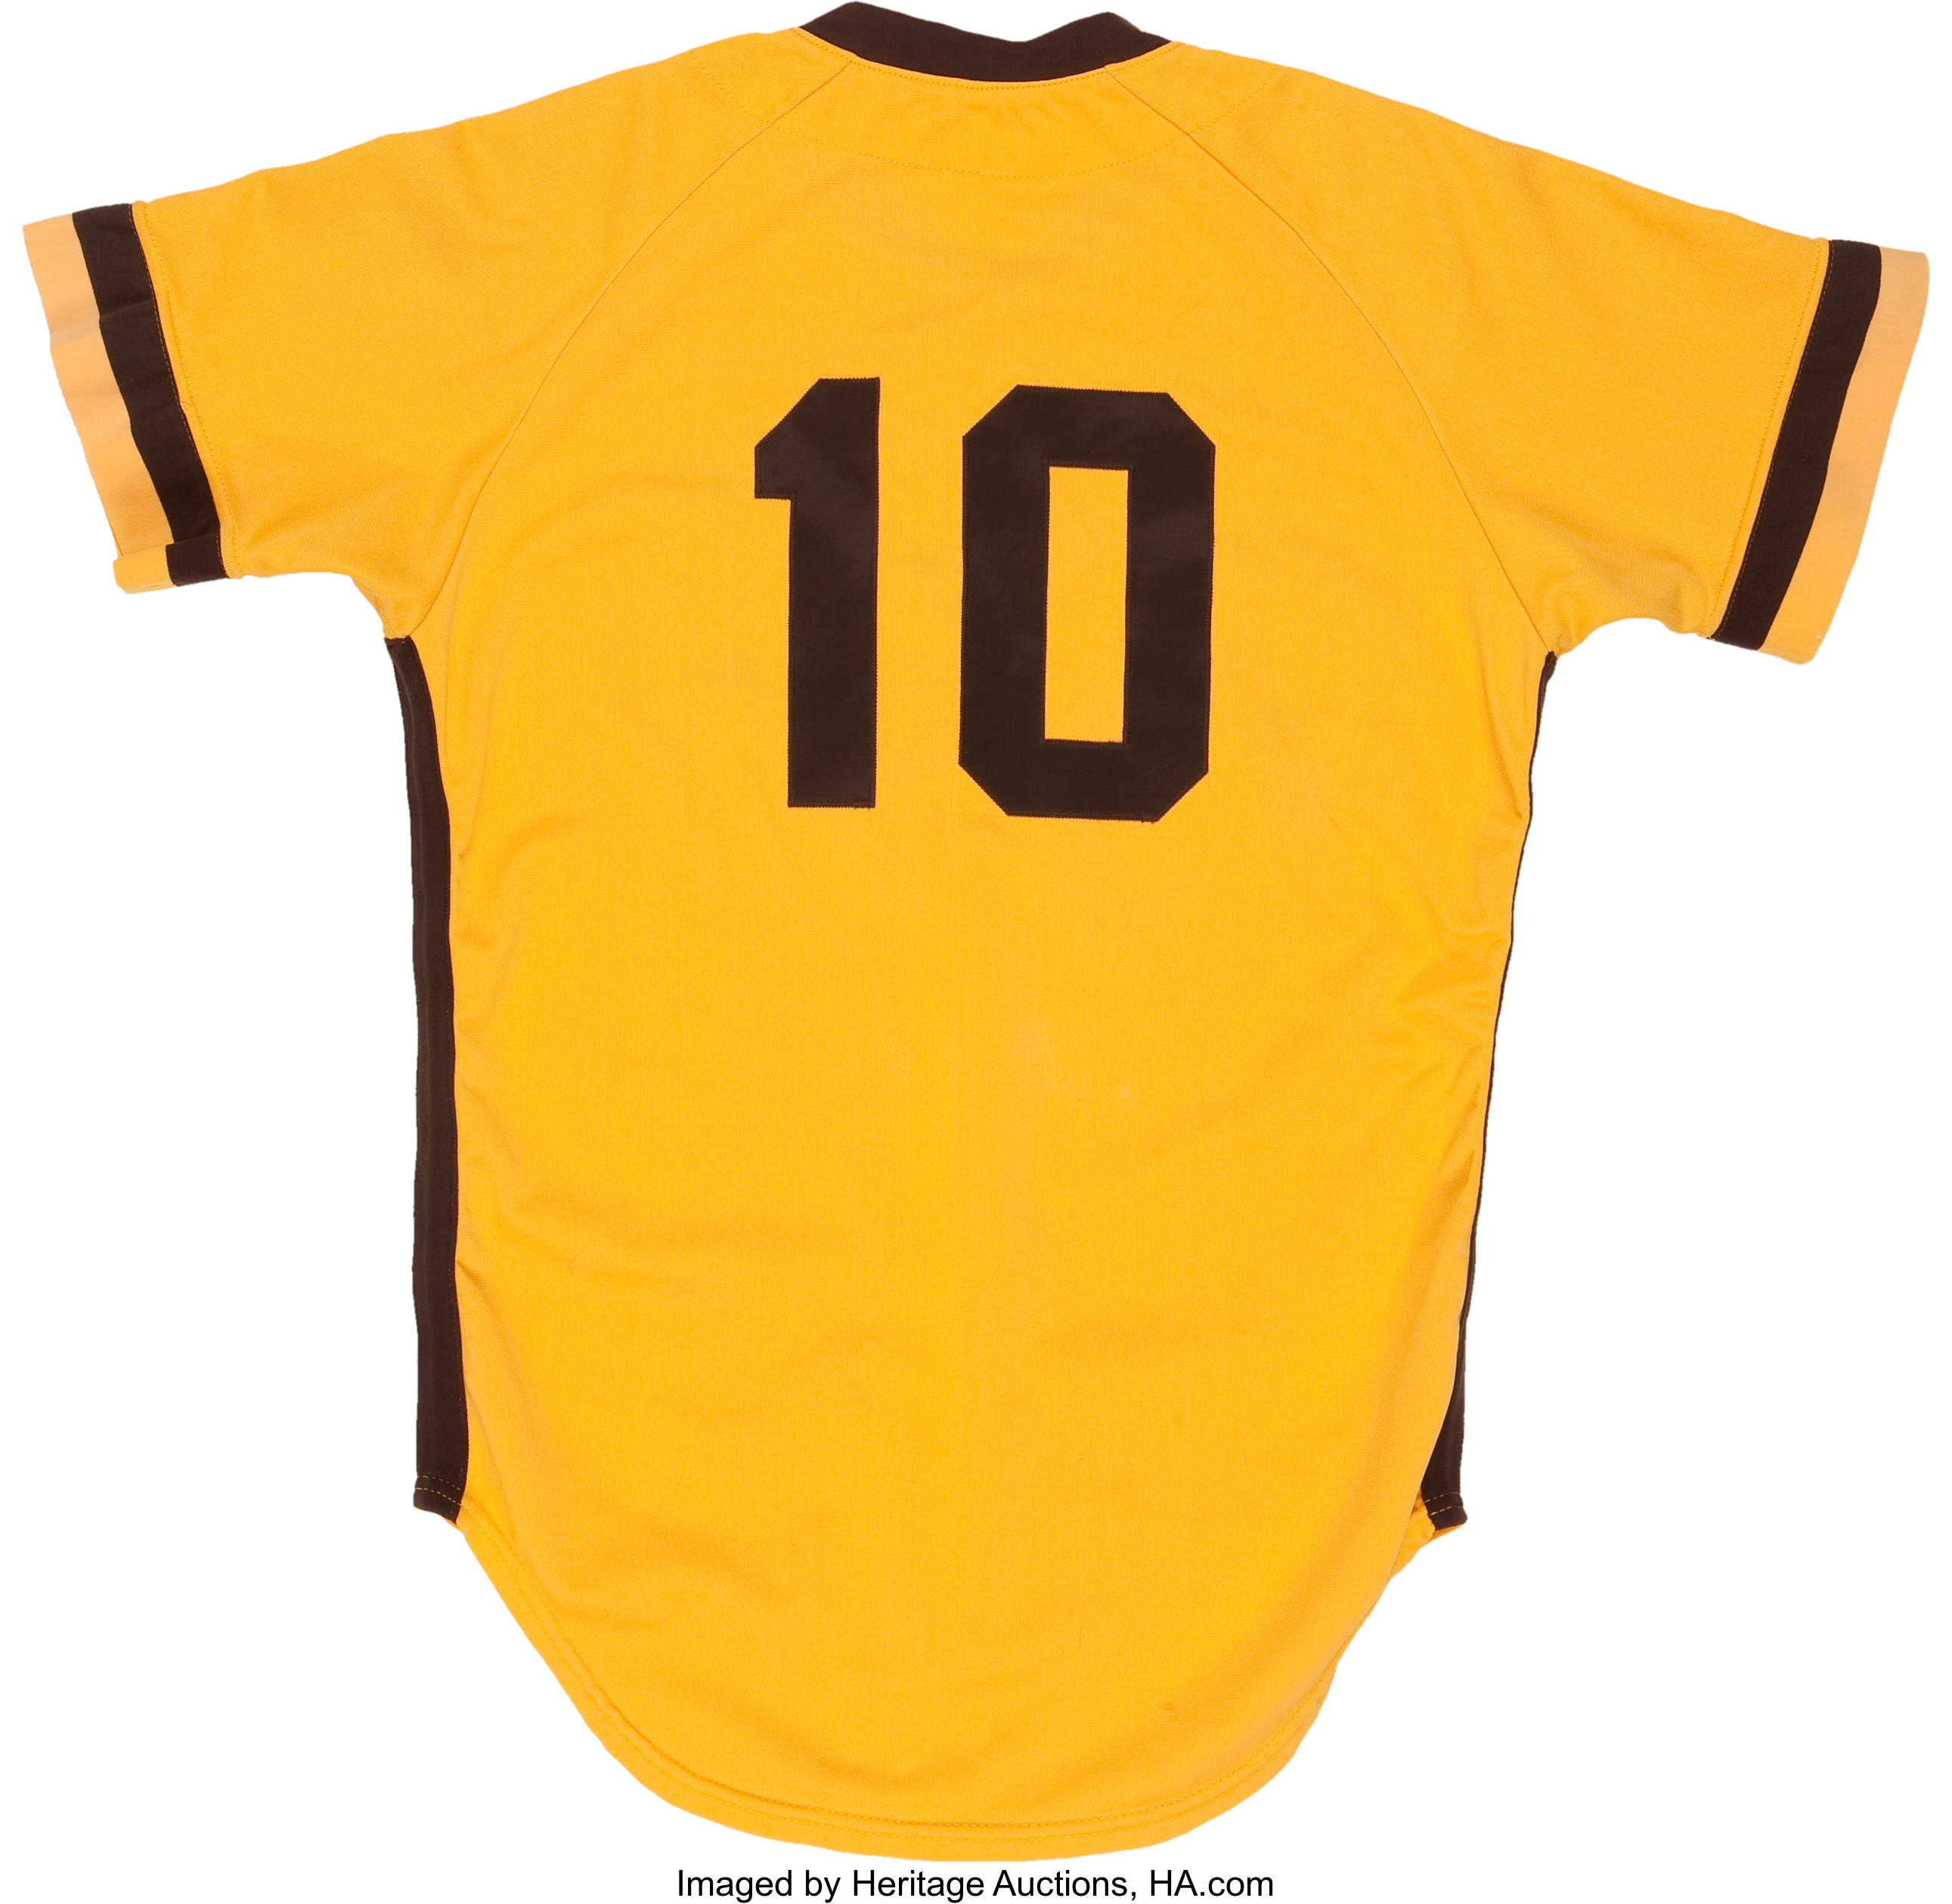 San Diego Padres One Piece Baseball Jersey Yellow - Scesy